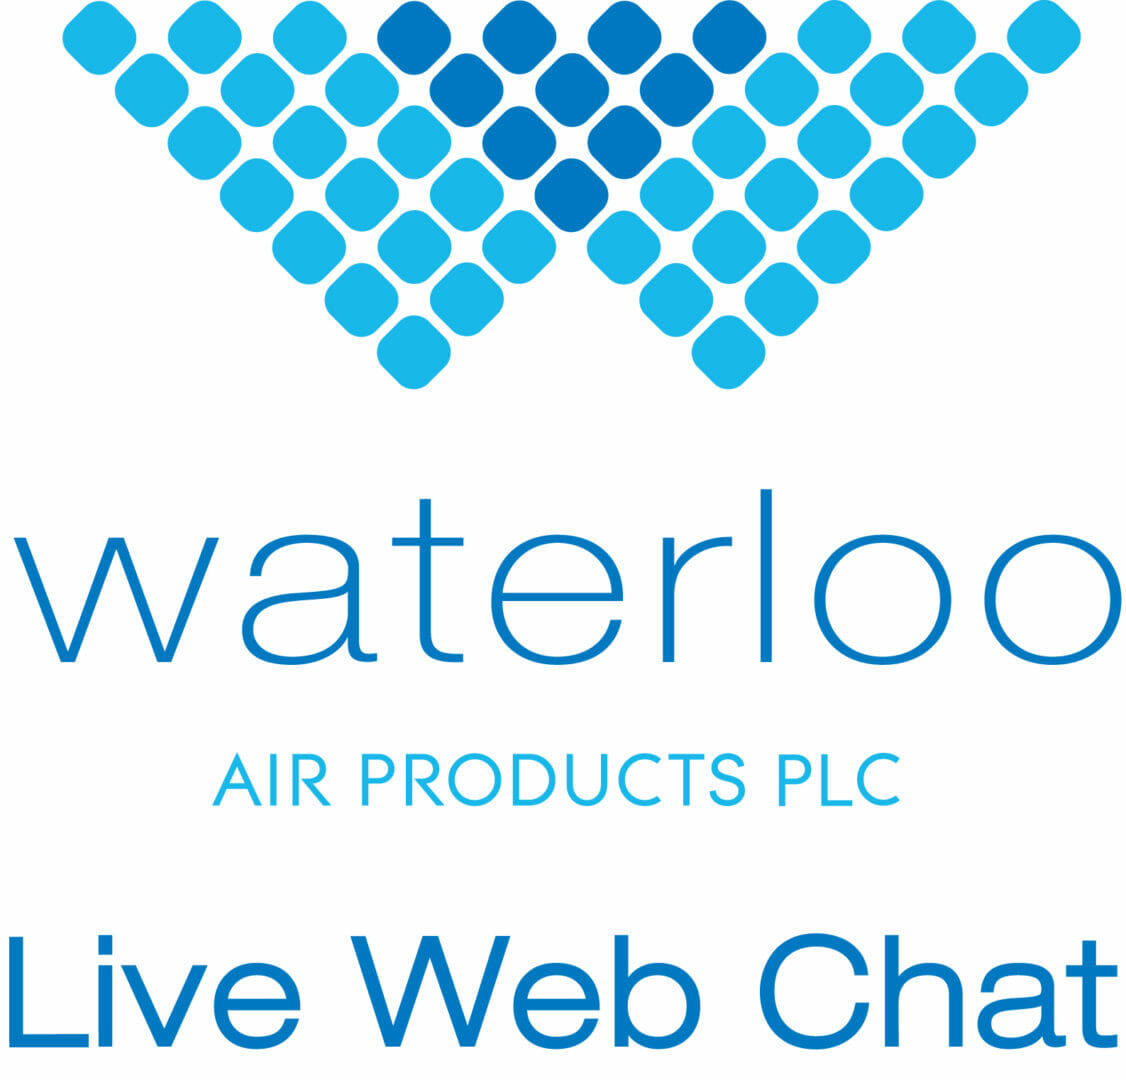 Live web chat for Waterloo Now launched   www.waterloo.co.uk